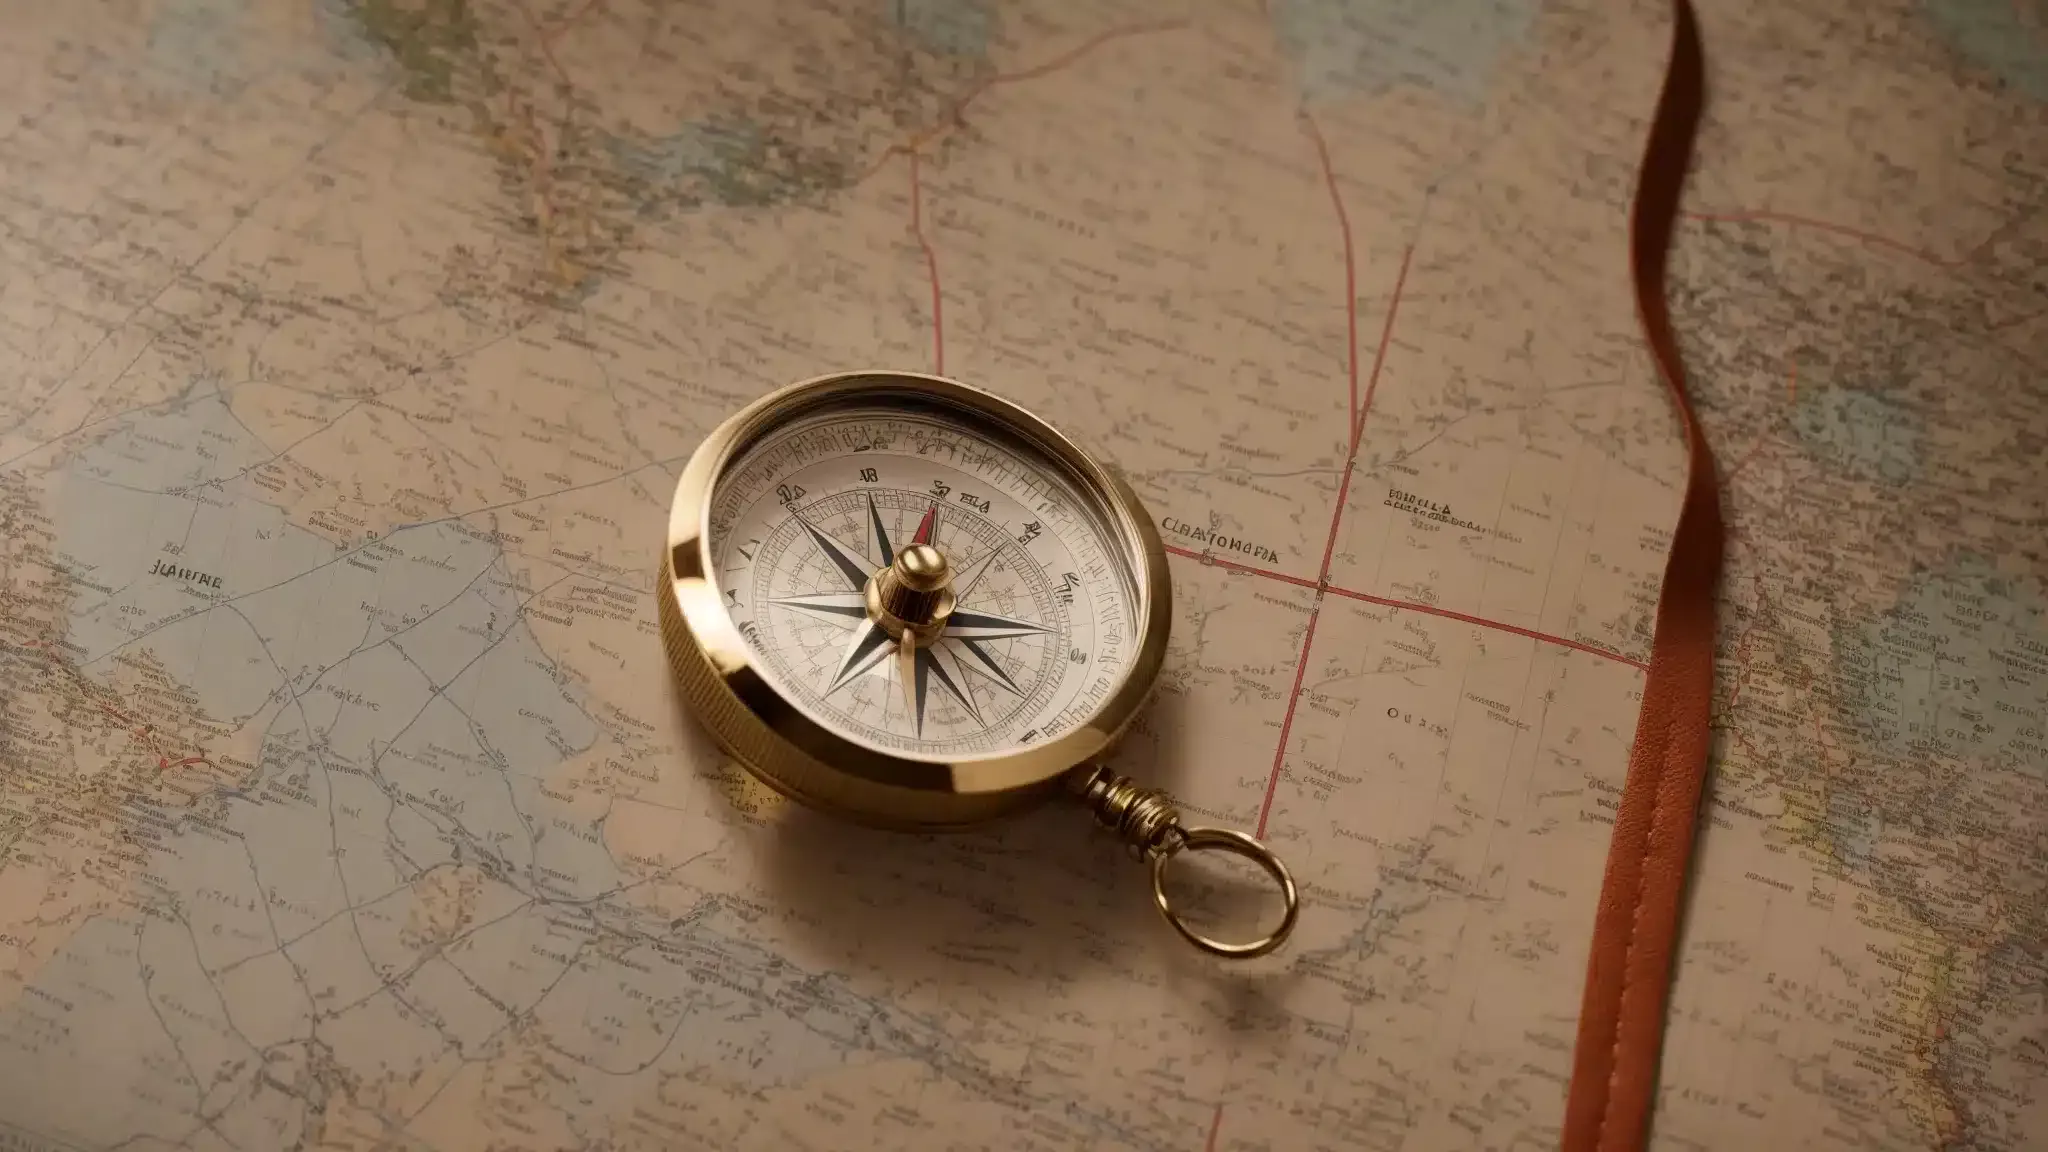 a compass on a map symbolizing the navigational challenges of seo and the strategic direction provided by redirects.